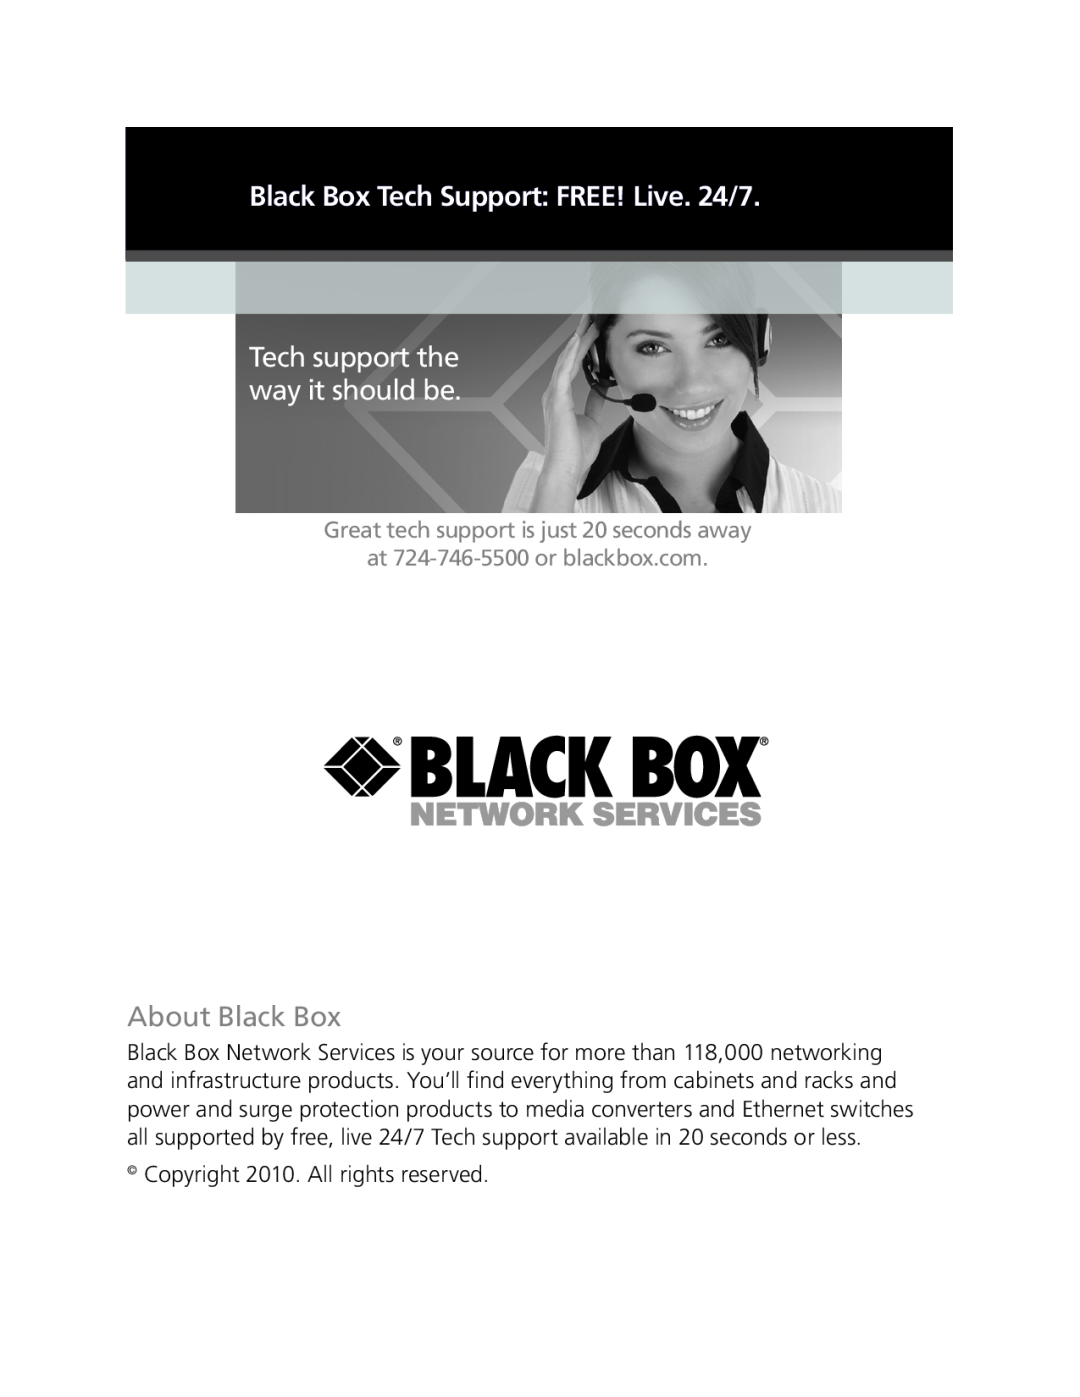 Black Box LBMC300-MMST manual Tech support the way it should be, Black Box Tech Support FREE! Live. 24/7, About Black Box 